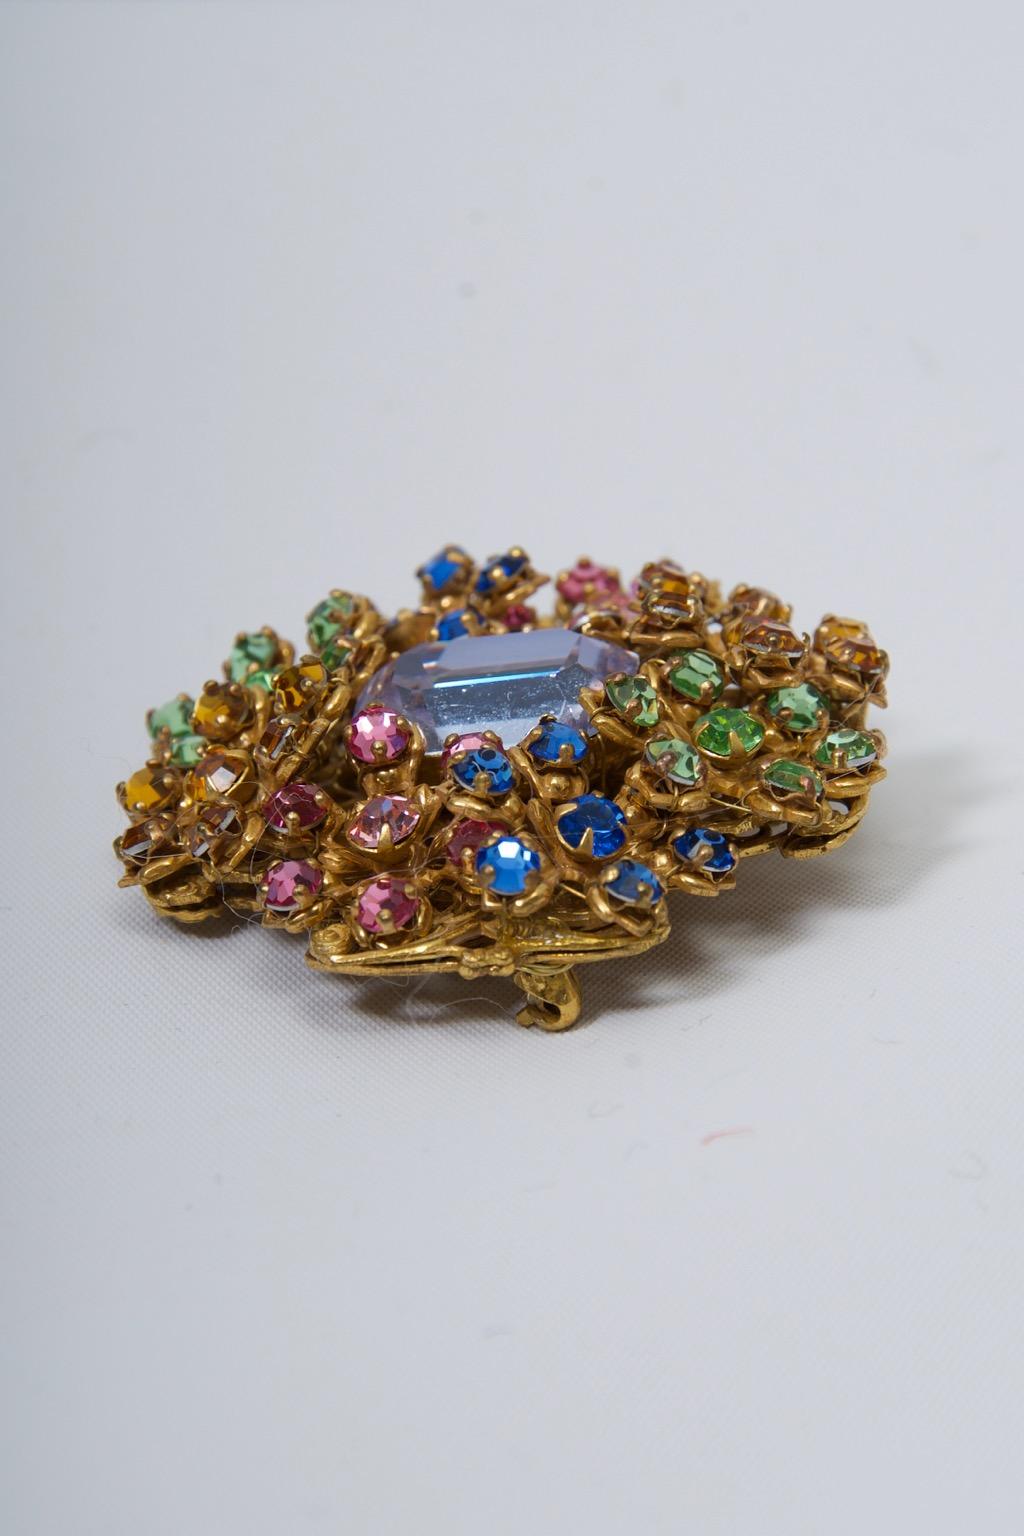 Vintage Miriam Haskell brooch, the pierced gold metal frame featuring sections of pastel crystals in pink, green, blue, and yellow centering a large emerald-shaped pale blue crystal. Oval plaque marked 